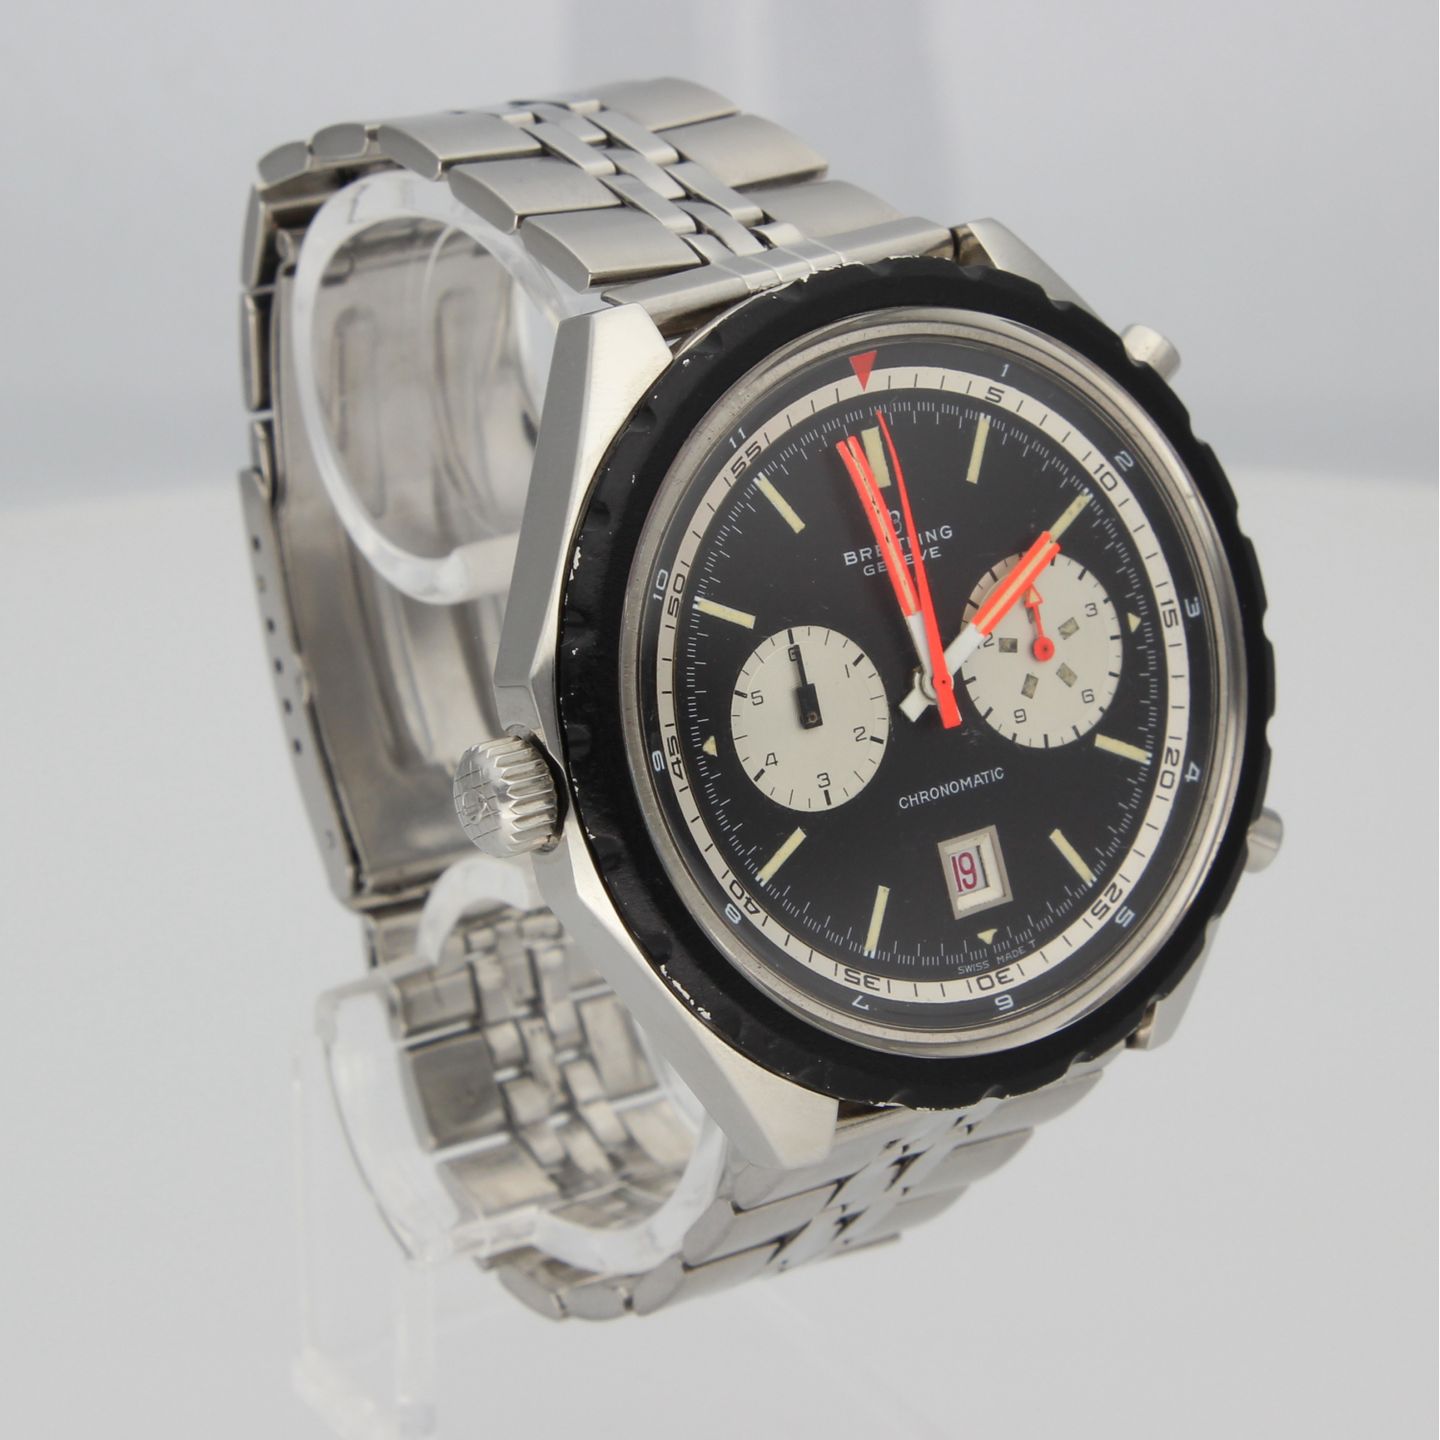 Breitling Chrono-Matic 11525/67 (1968) - Black dial 48 mm Steel case (4/8)